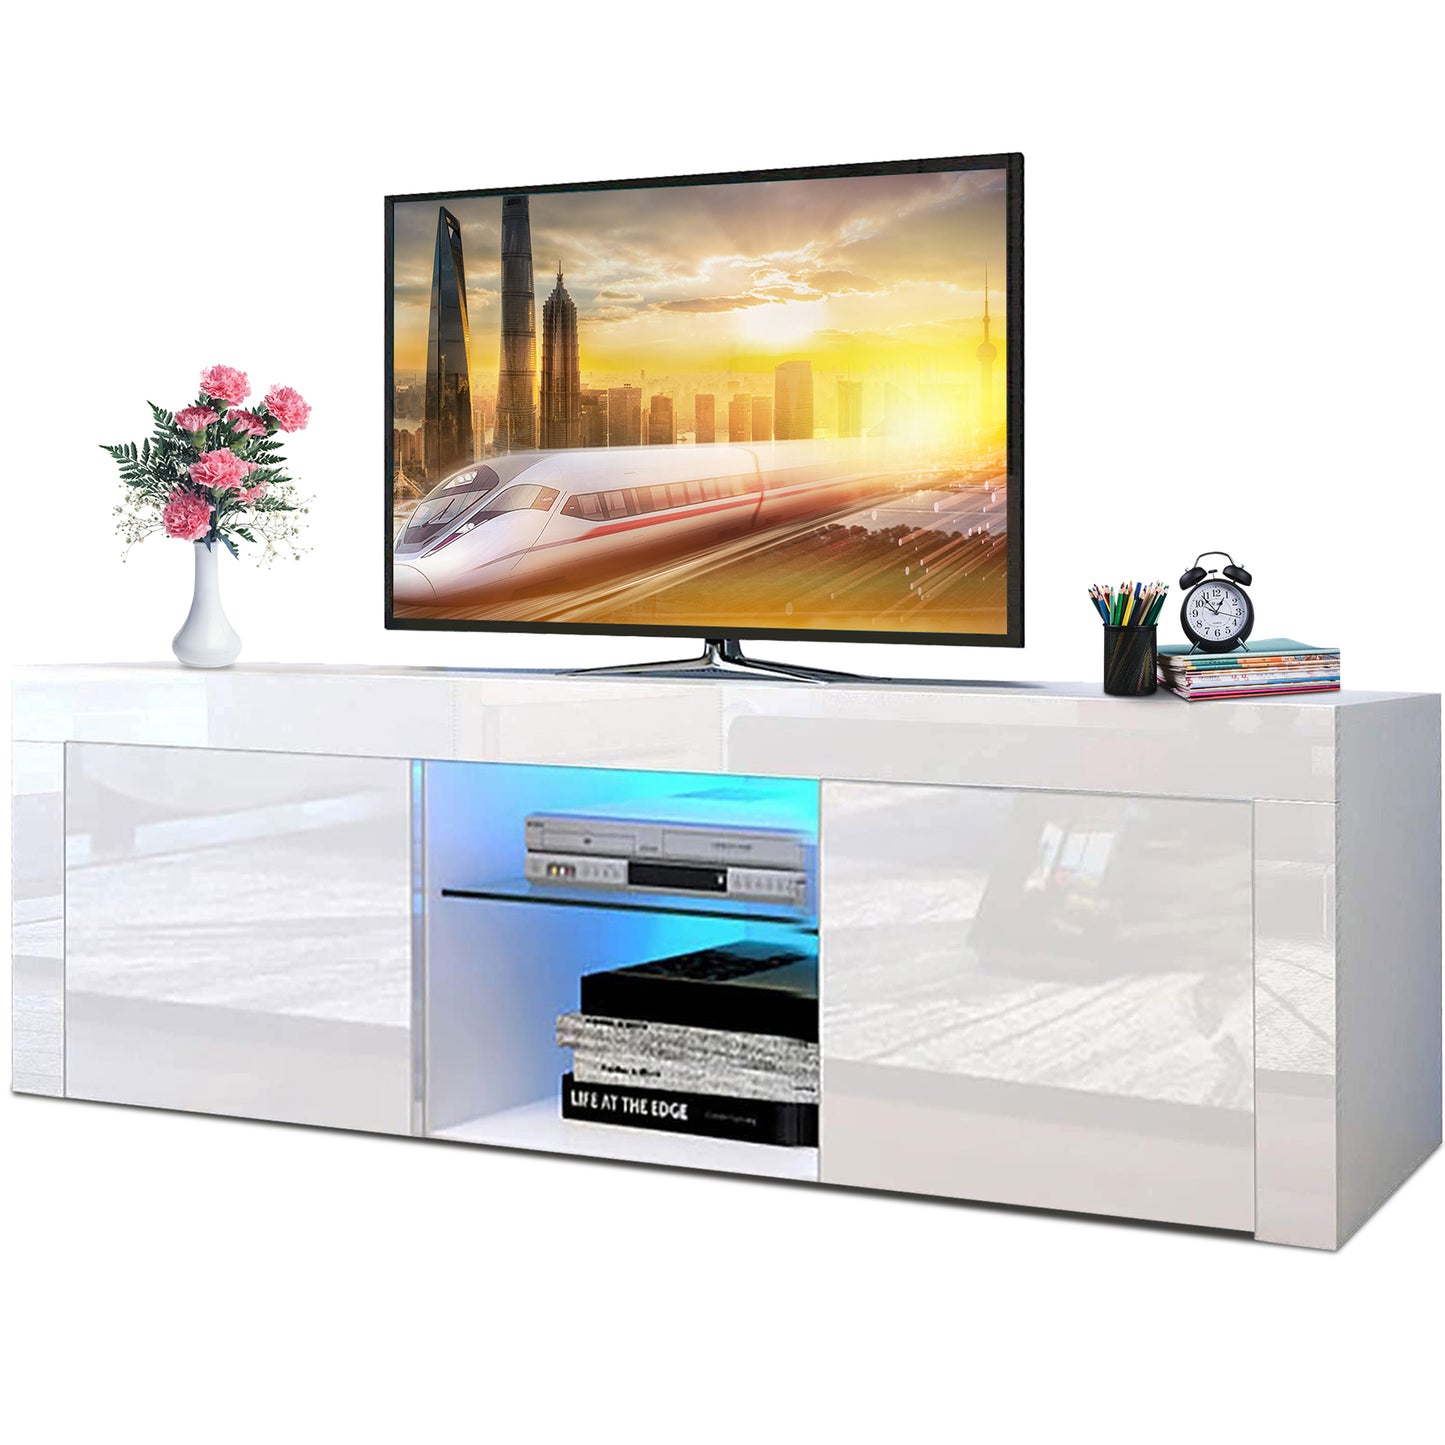 Modern LED TV Stand for 65 Inch TVs with Color Change Lighting, White TV Stand Universal Entertainment Center for Video Gaming, Movies, and Home Decor, Clear Glass Shelving, 59"L×14" W×18"H